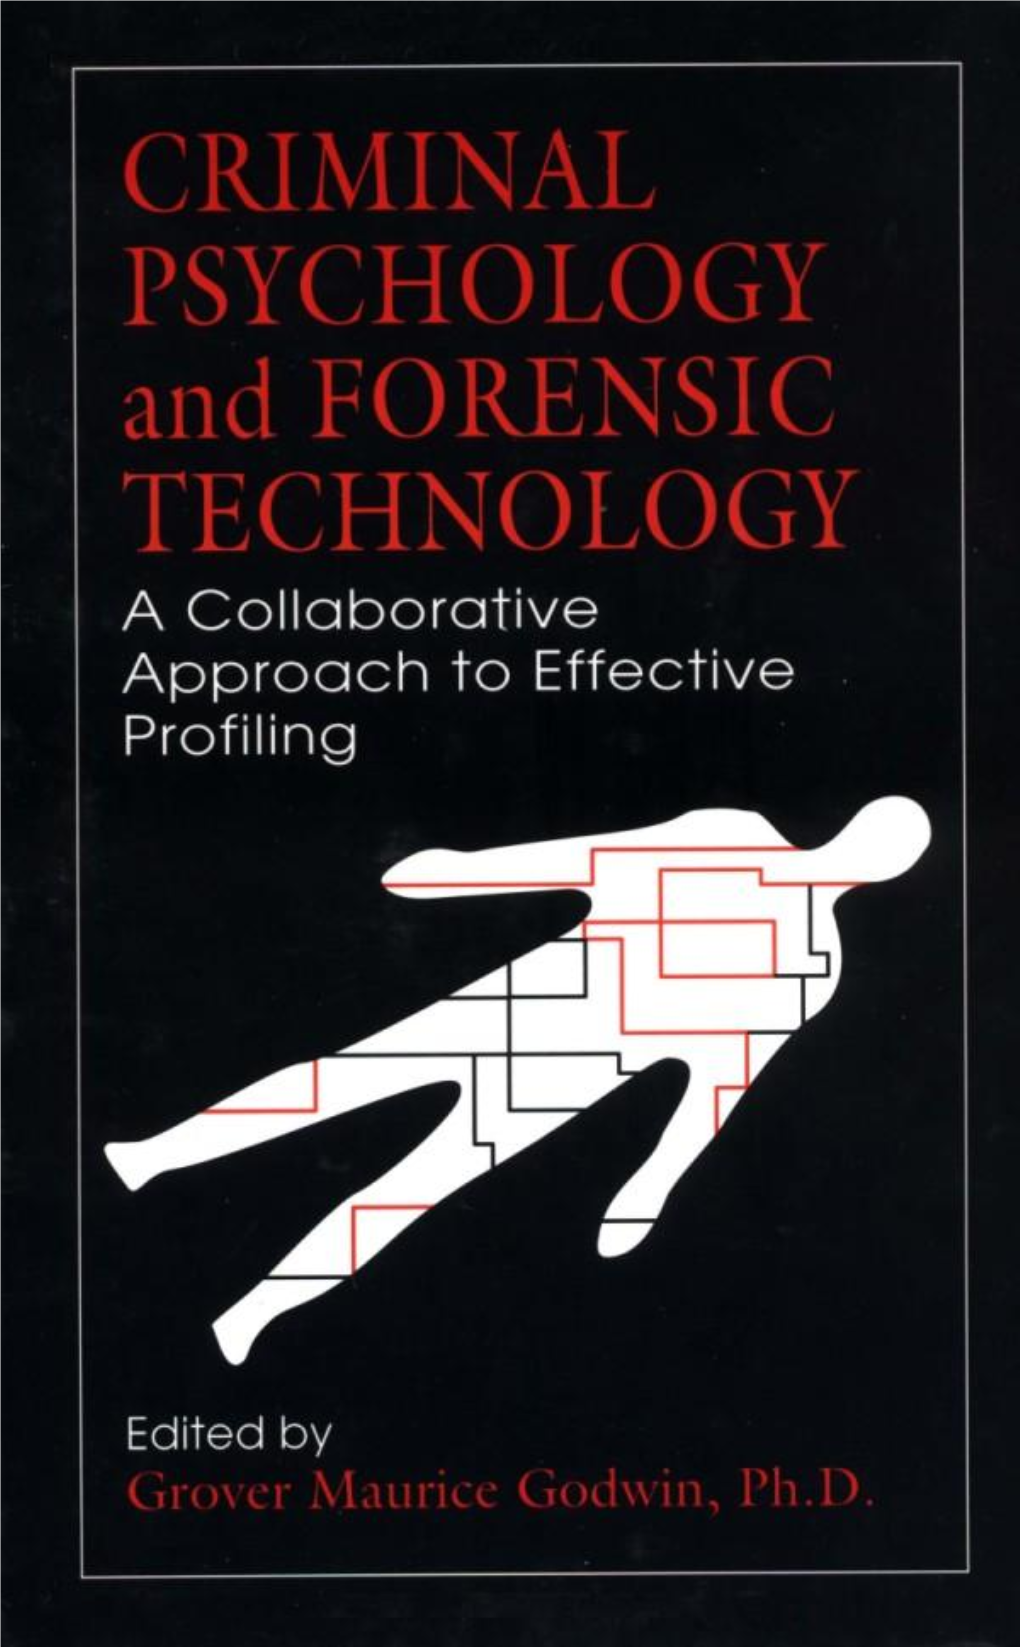 CRIMINAL PSYCHOLOGY and FORENSIC TECHNOLOGY a Collaborative Approach to Effective Profiling